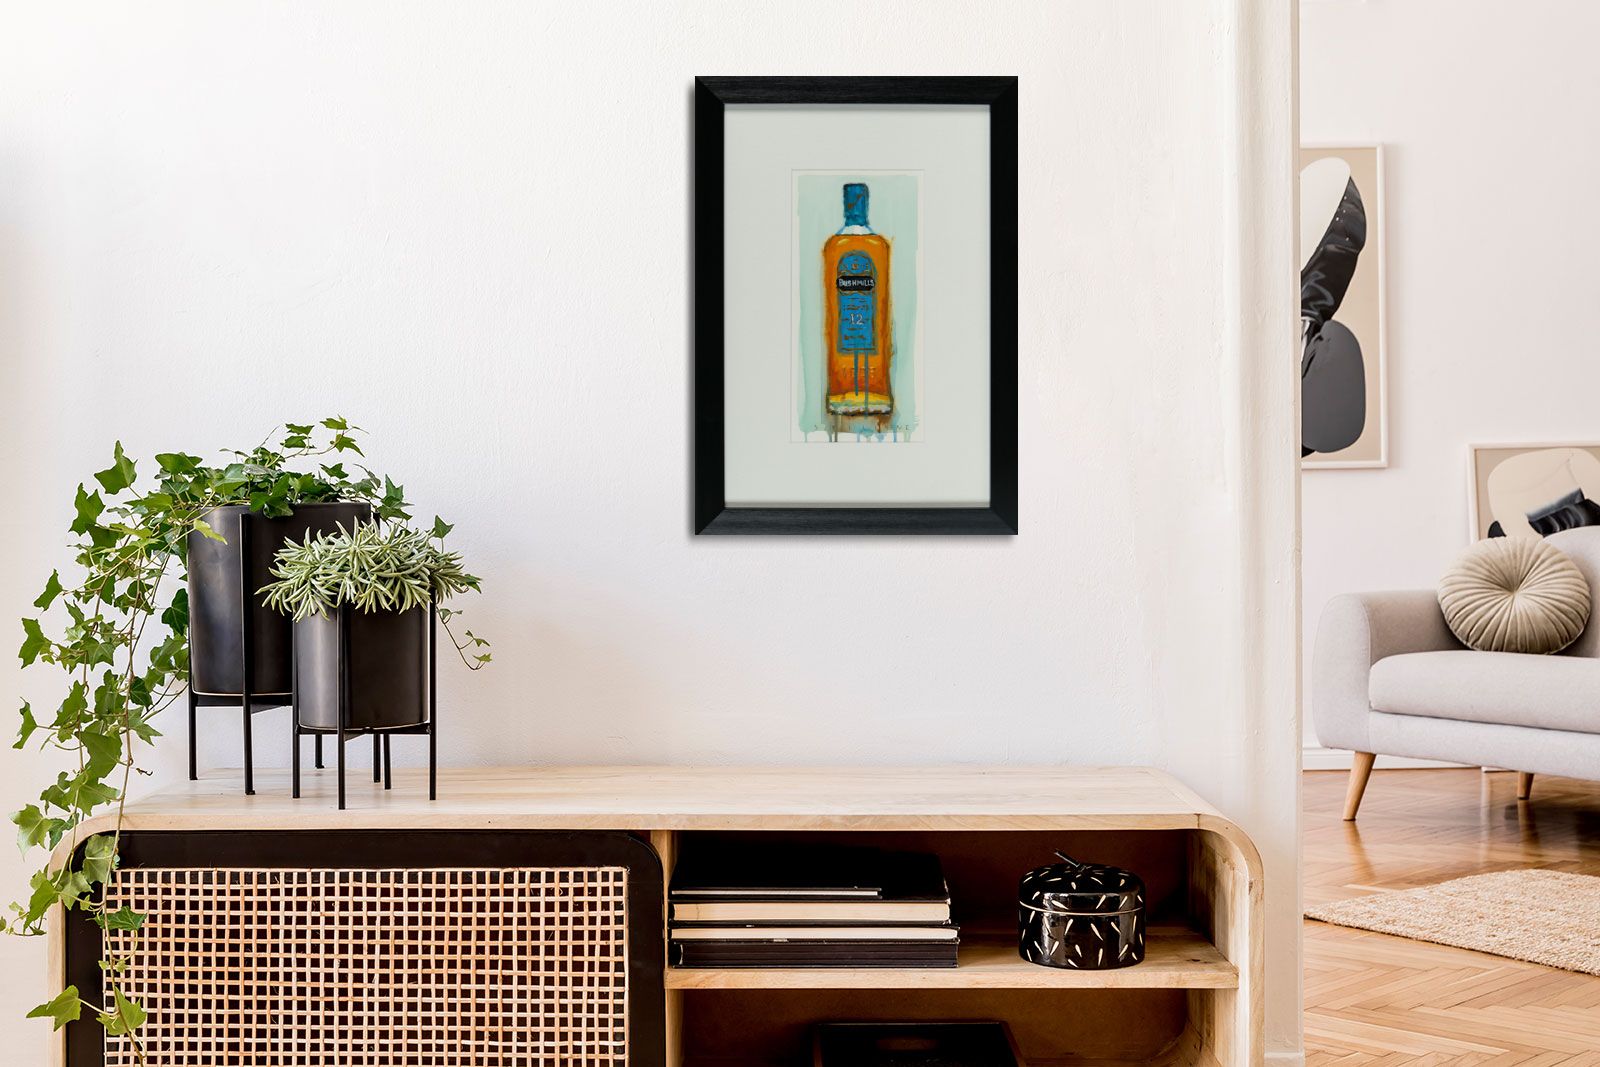 BUSHMILLS - (12 YEAR OLD BOTTLE) by Spillane at Ross's Online Art Auctions